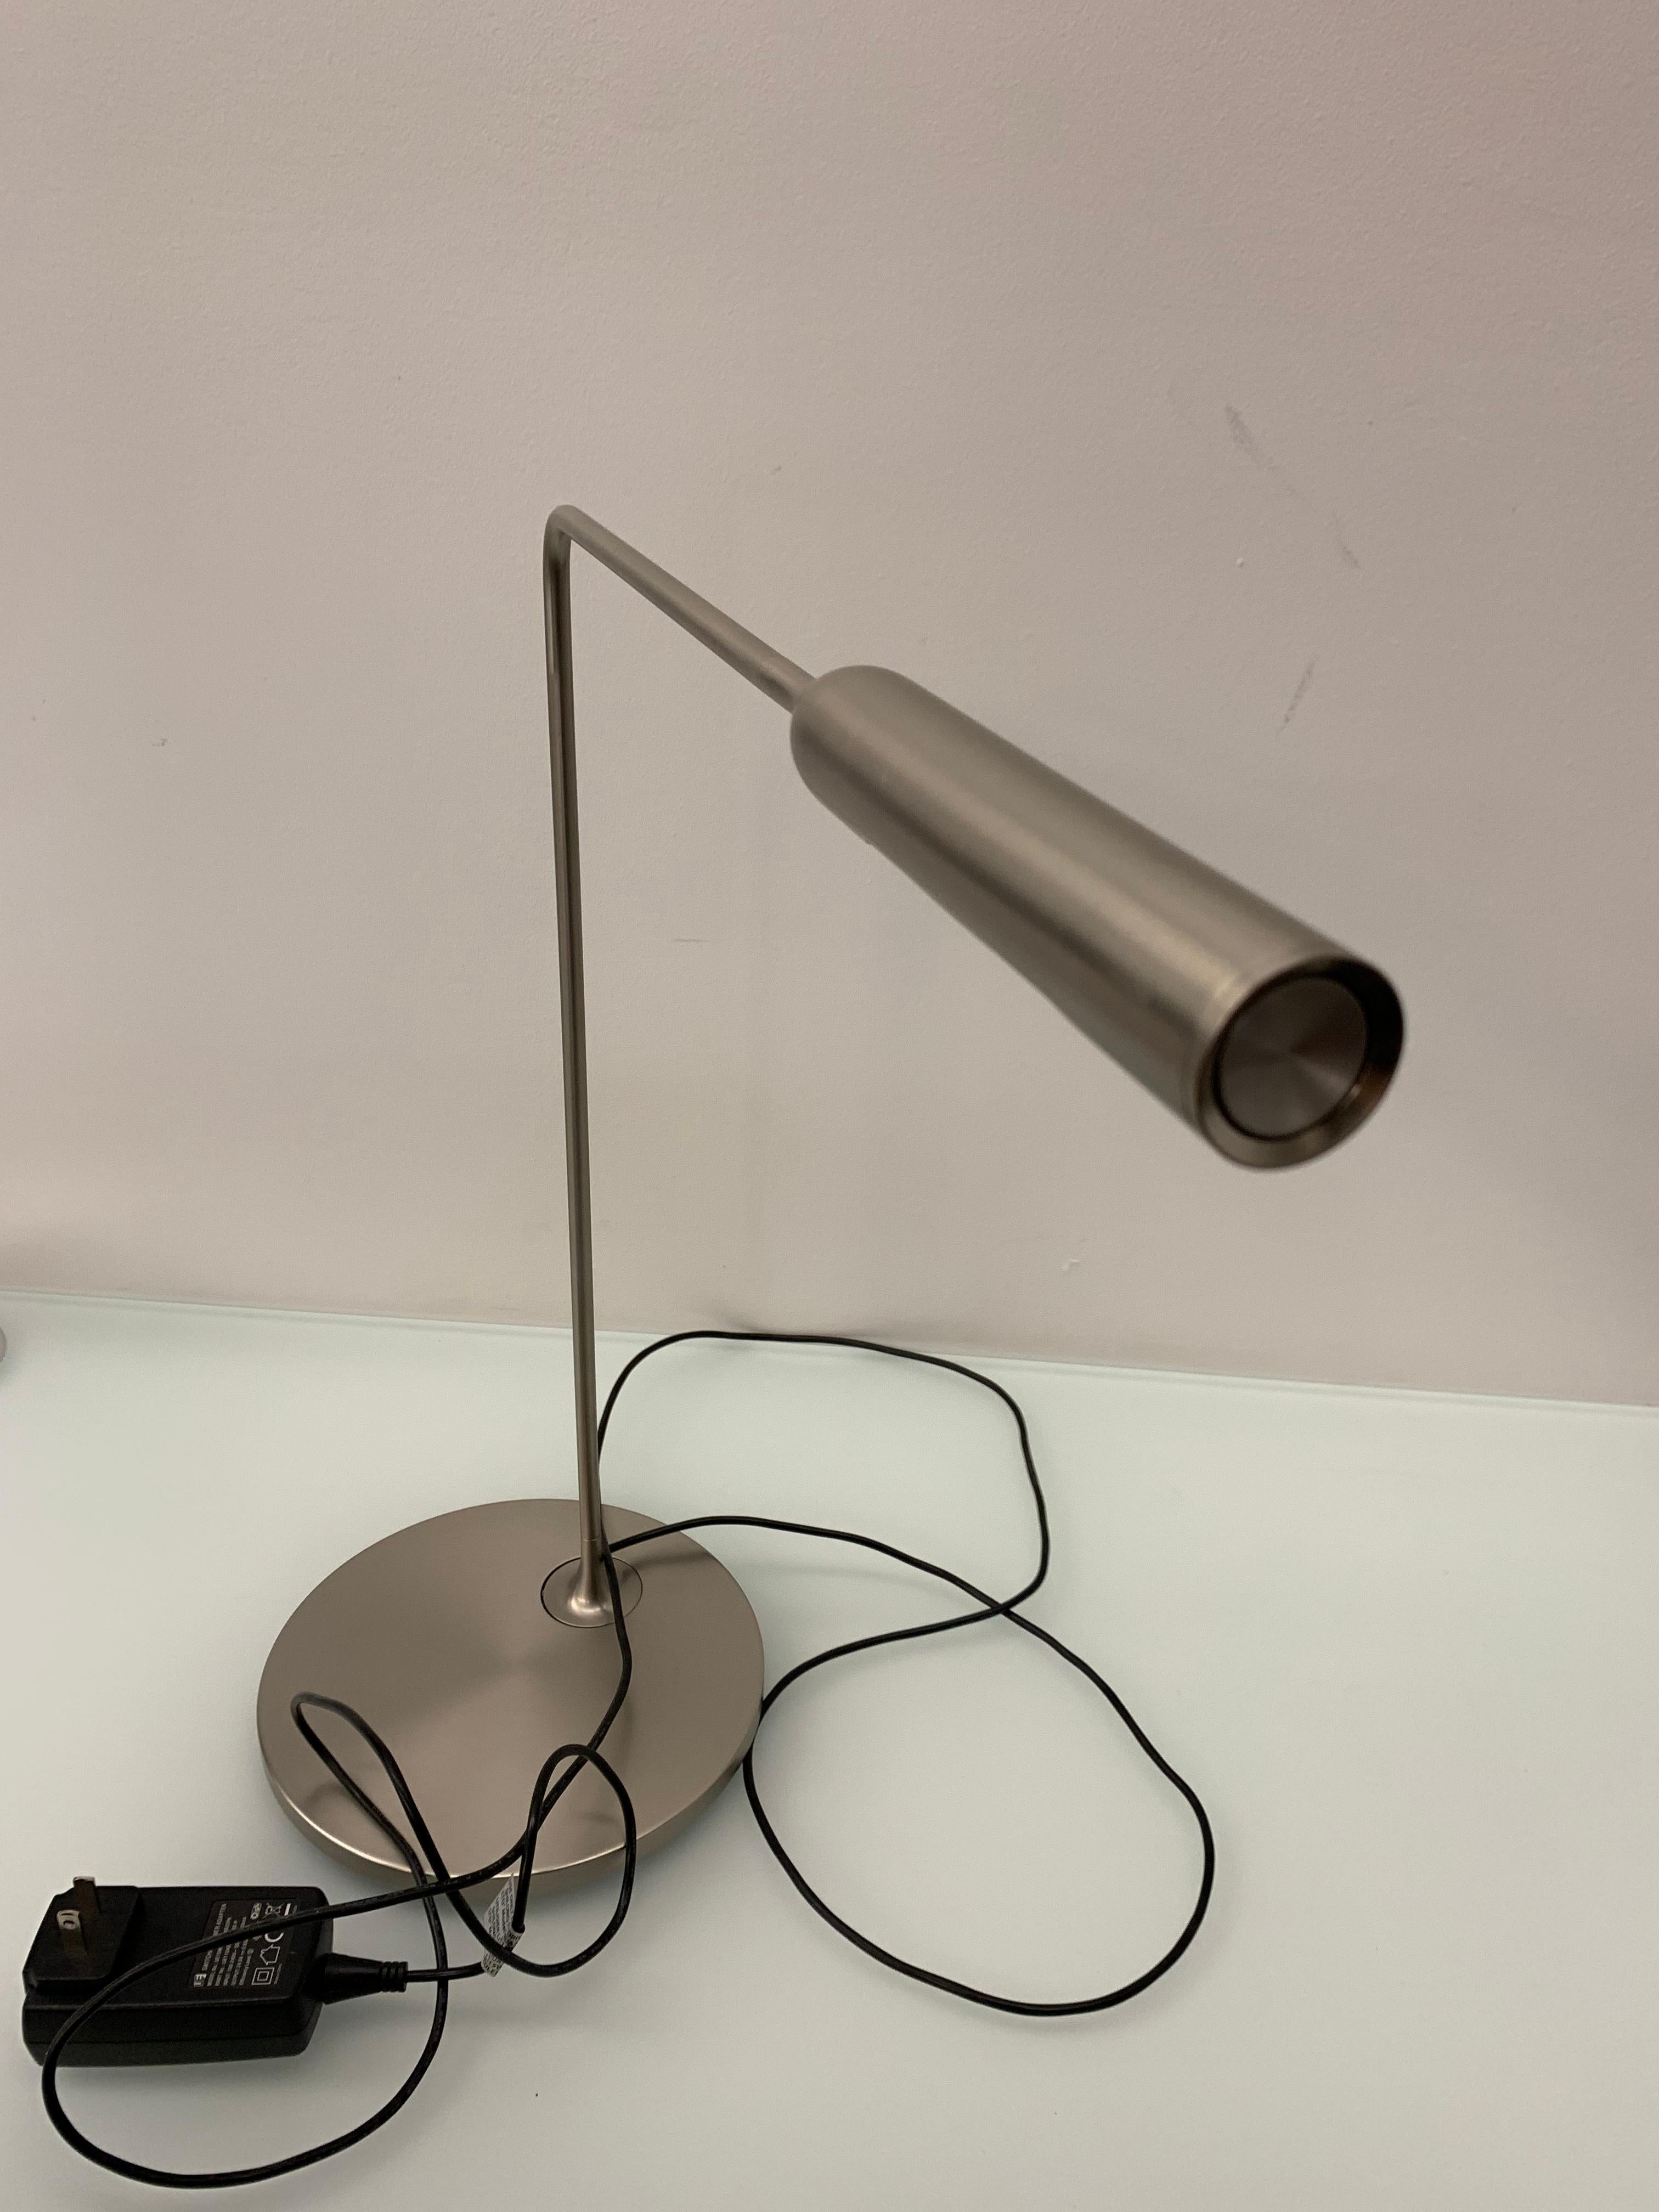 Contemporary Lumina Flo Desk Lamp in Brushed Nickel by Foster+Partners